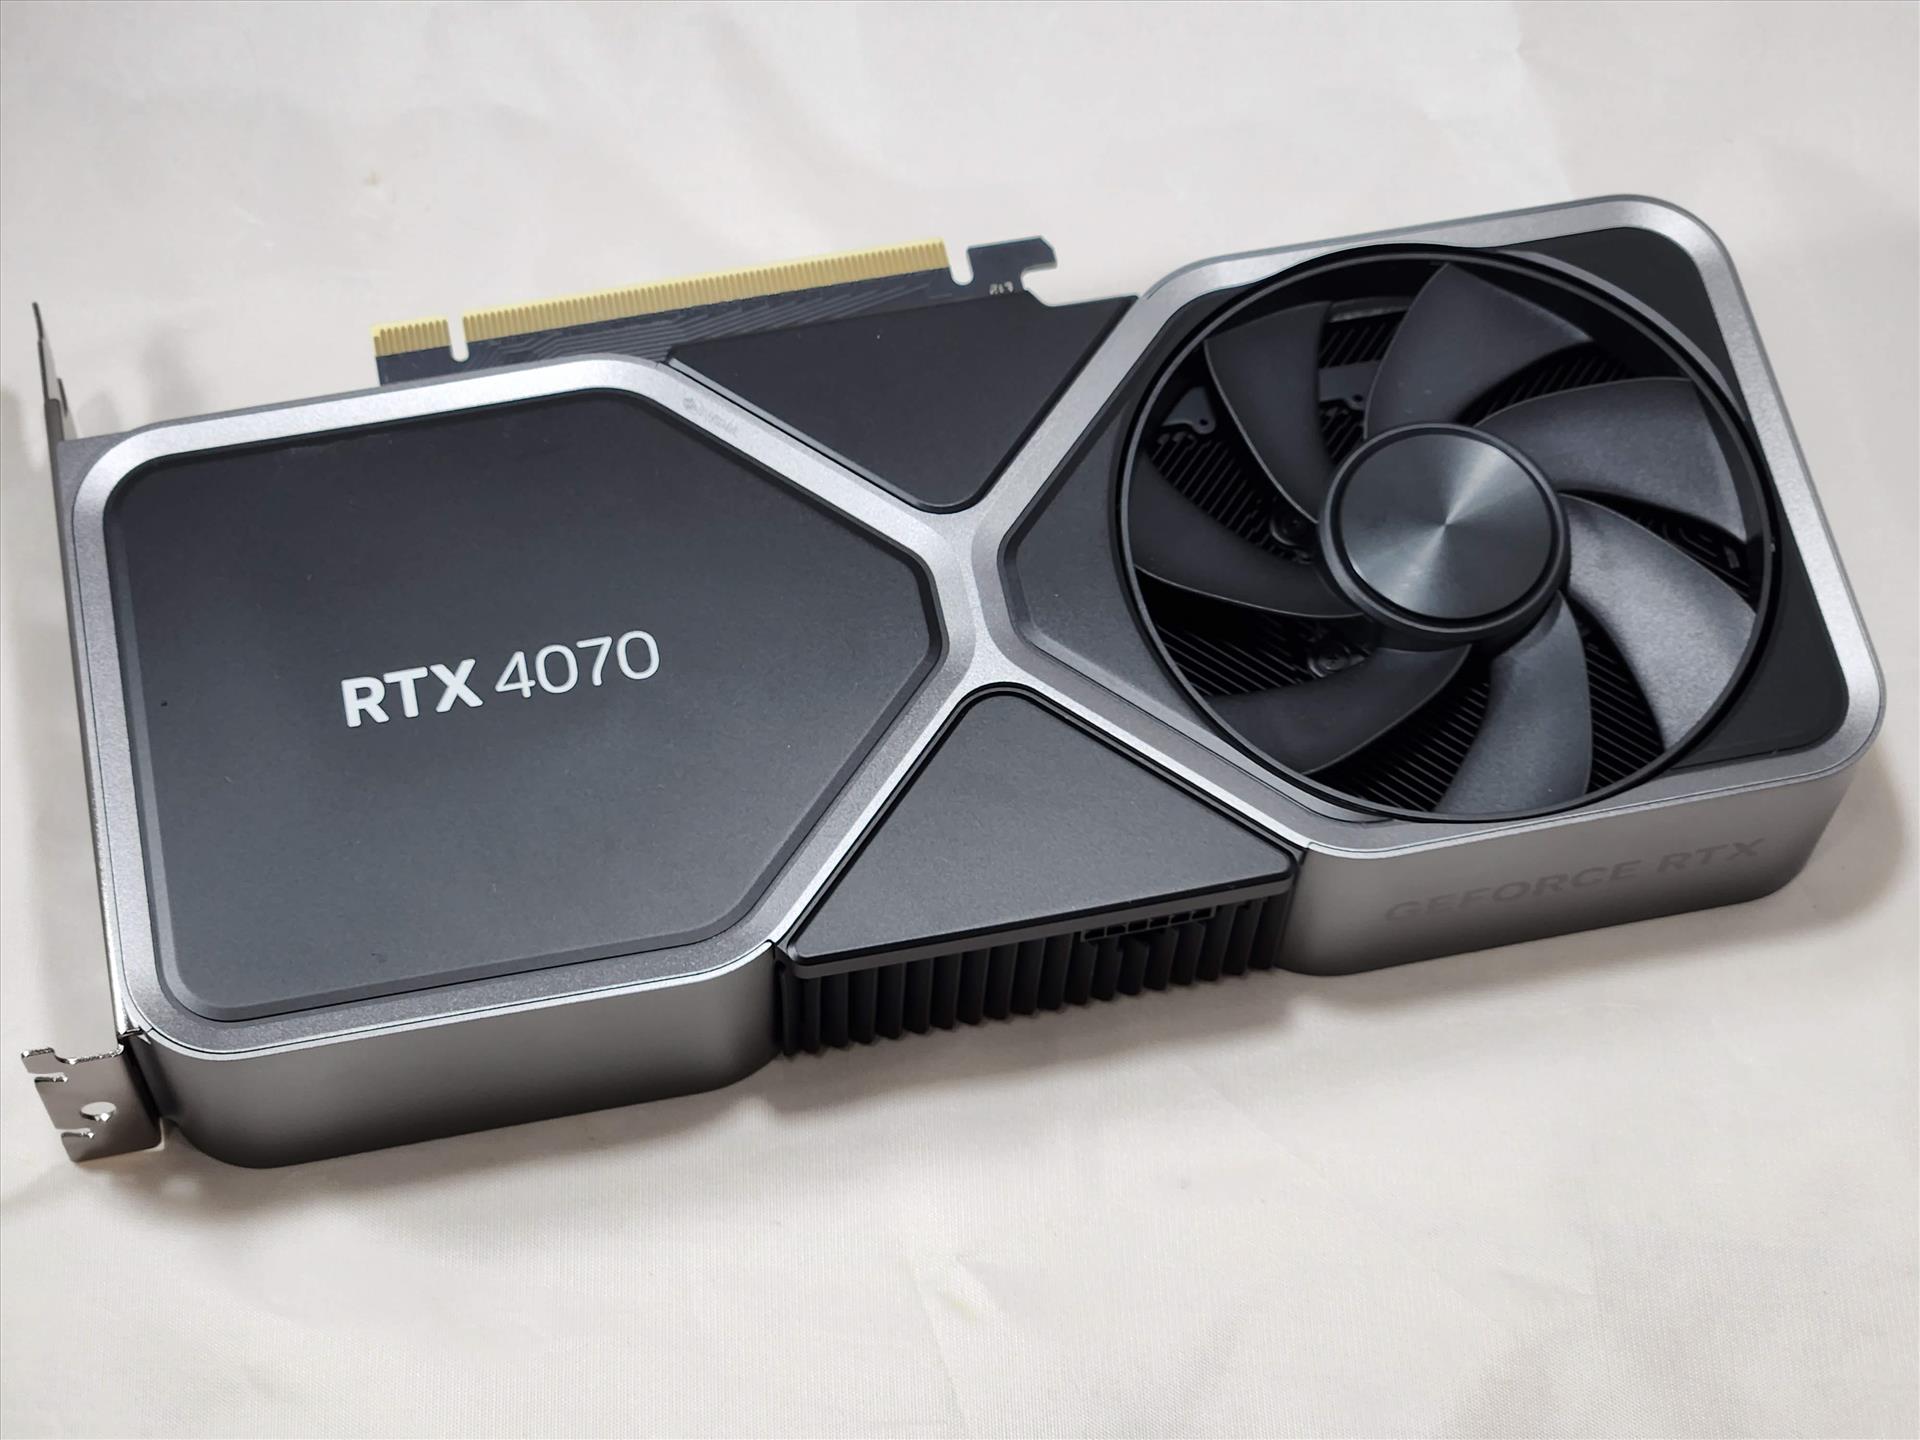 NVIDIA GeForce RTX 4070 Graphics Card Review : A slightly improved RTX 3080